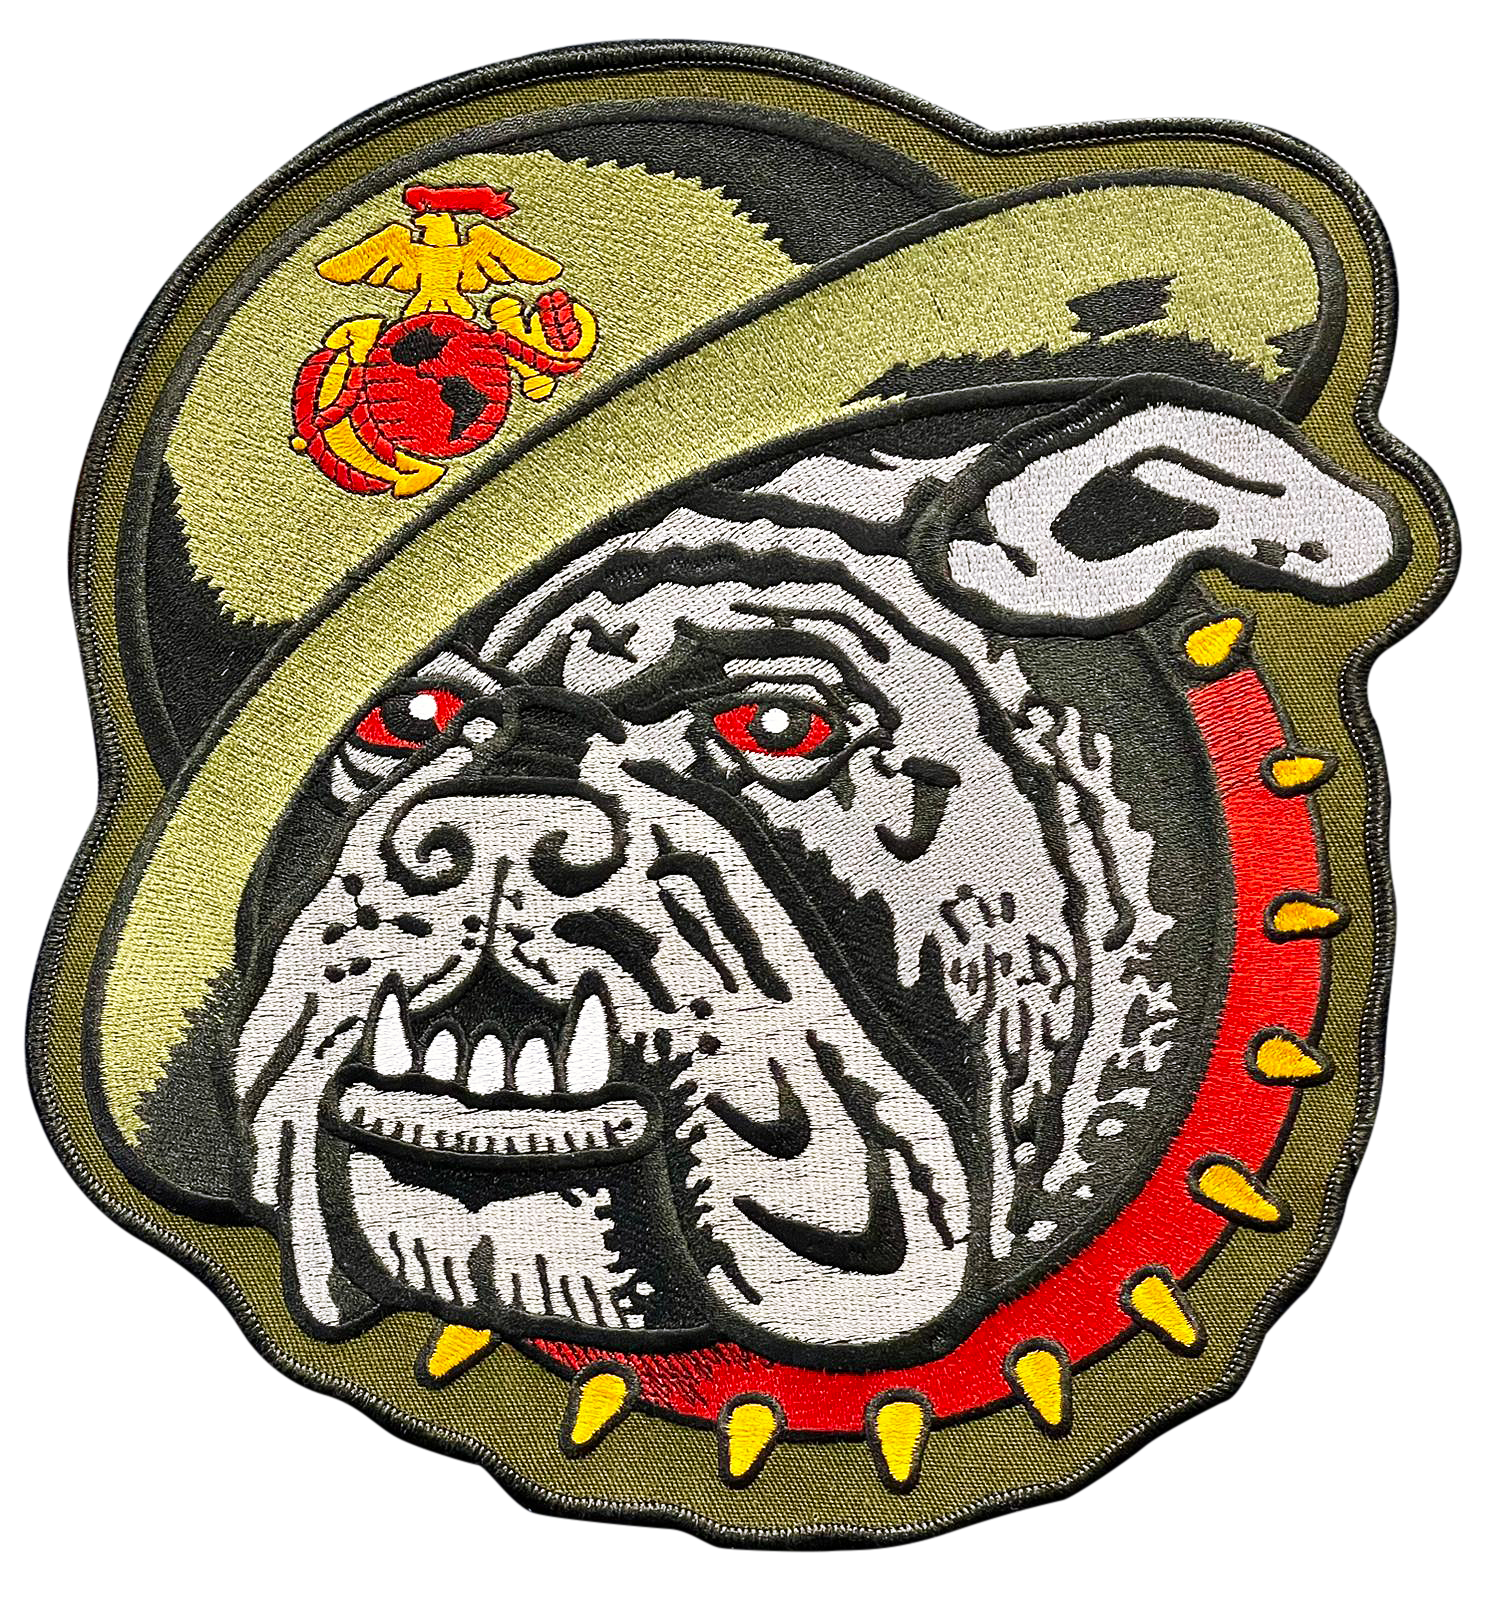 A patch of a bulldog wearing a hat.